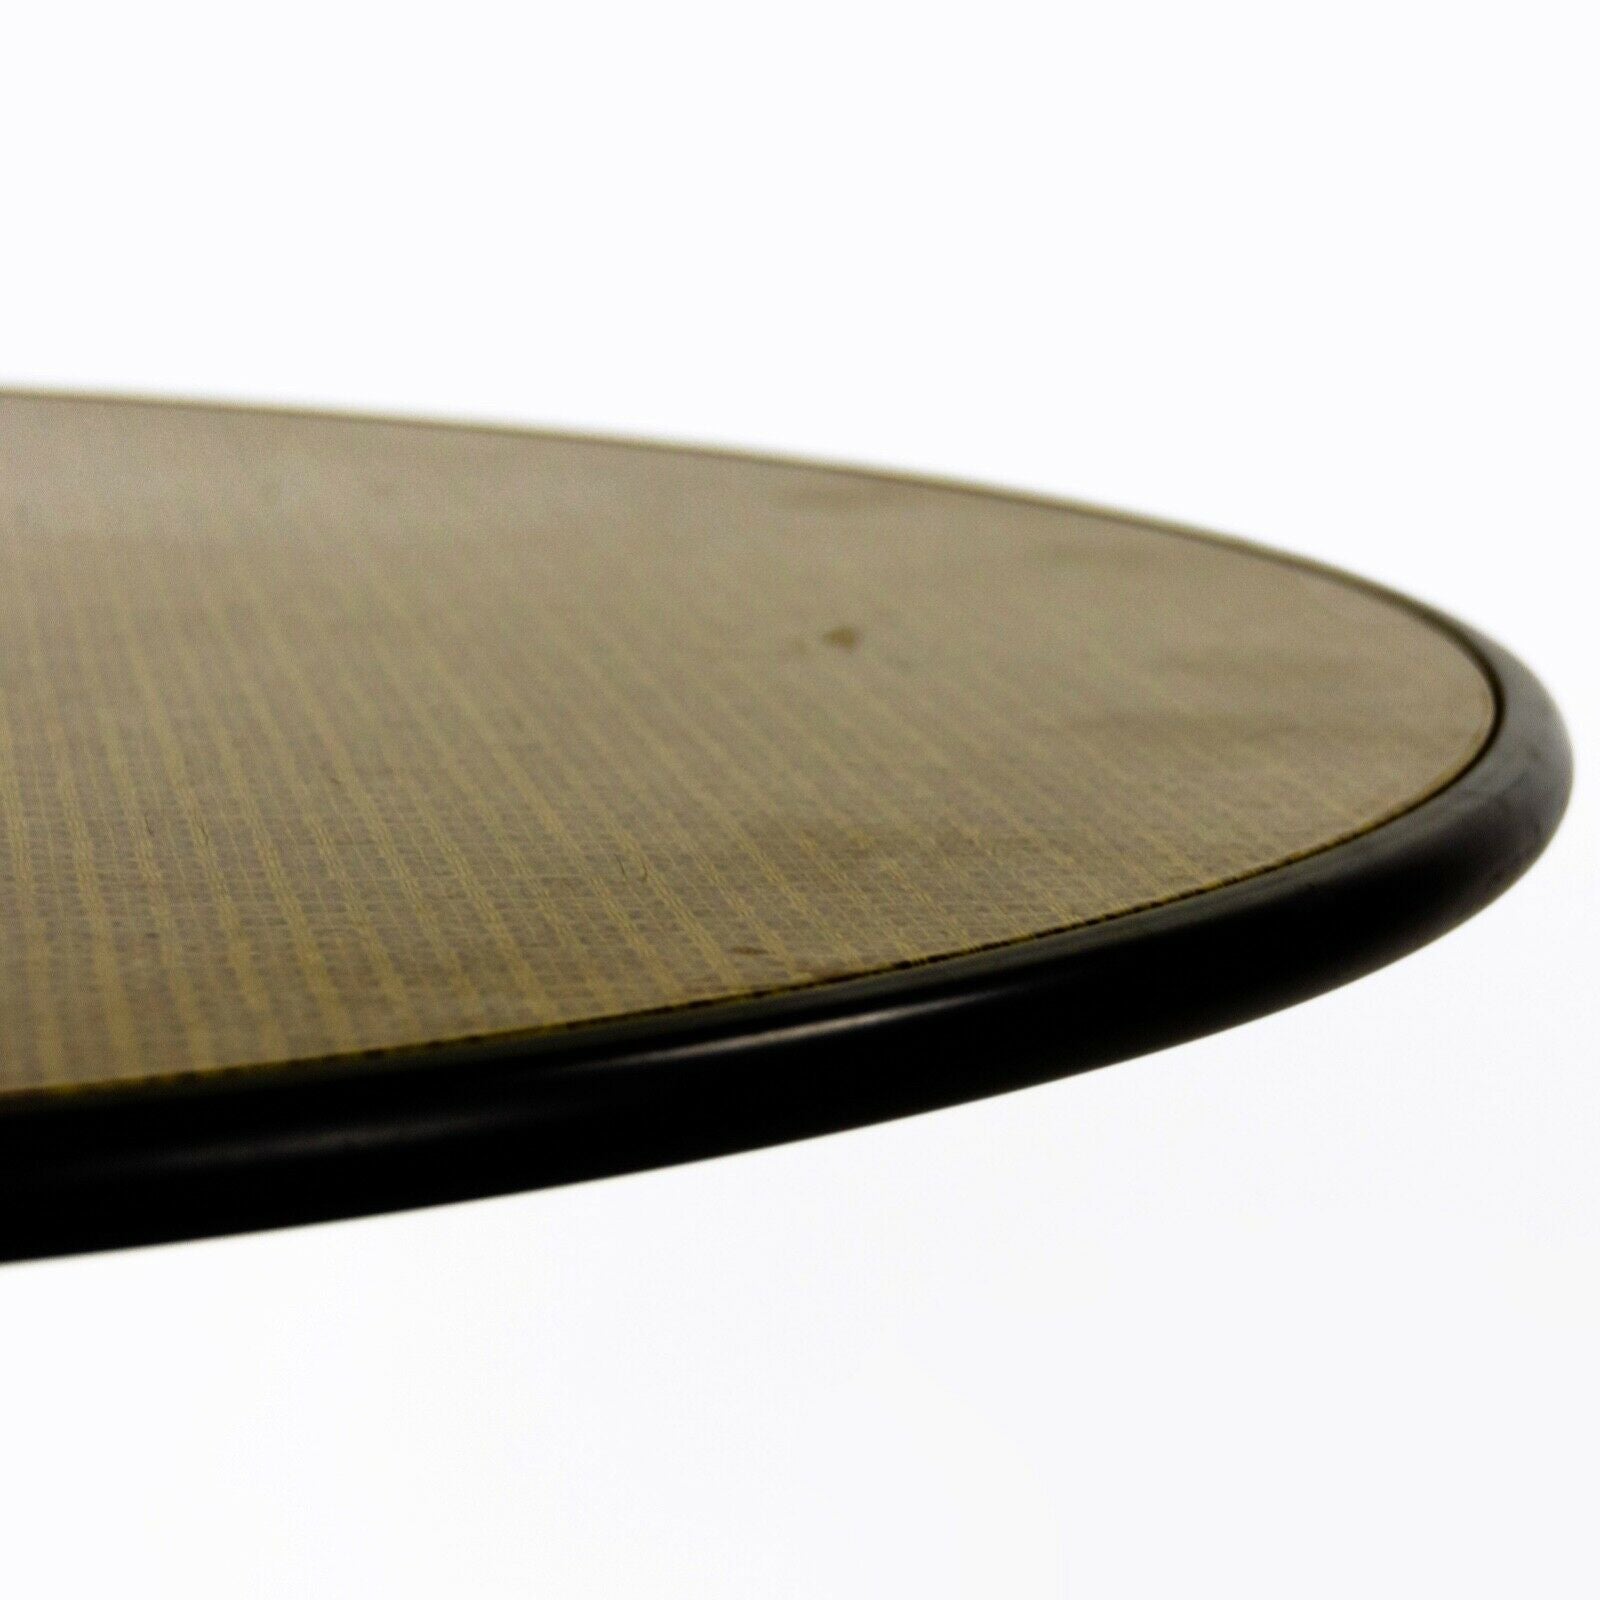 1967 Rare Alexander Girard / Ray Eames / Charles Eames Coffee Table with Gold Laminate Top